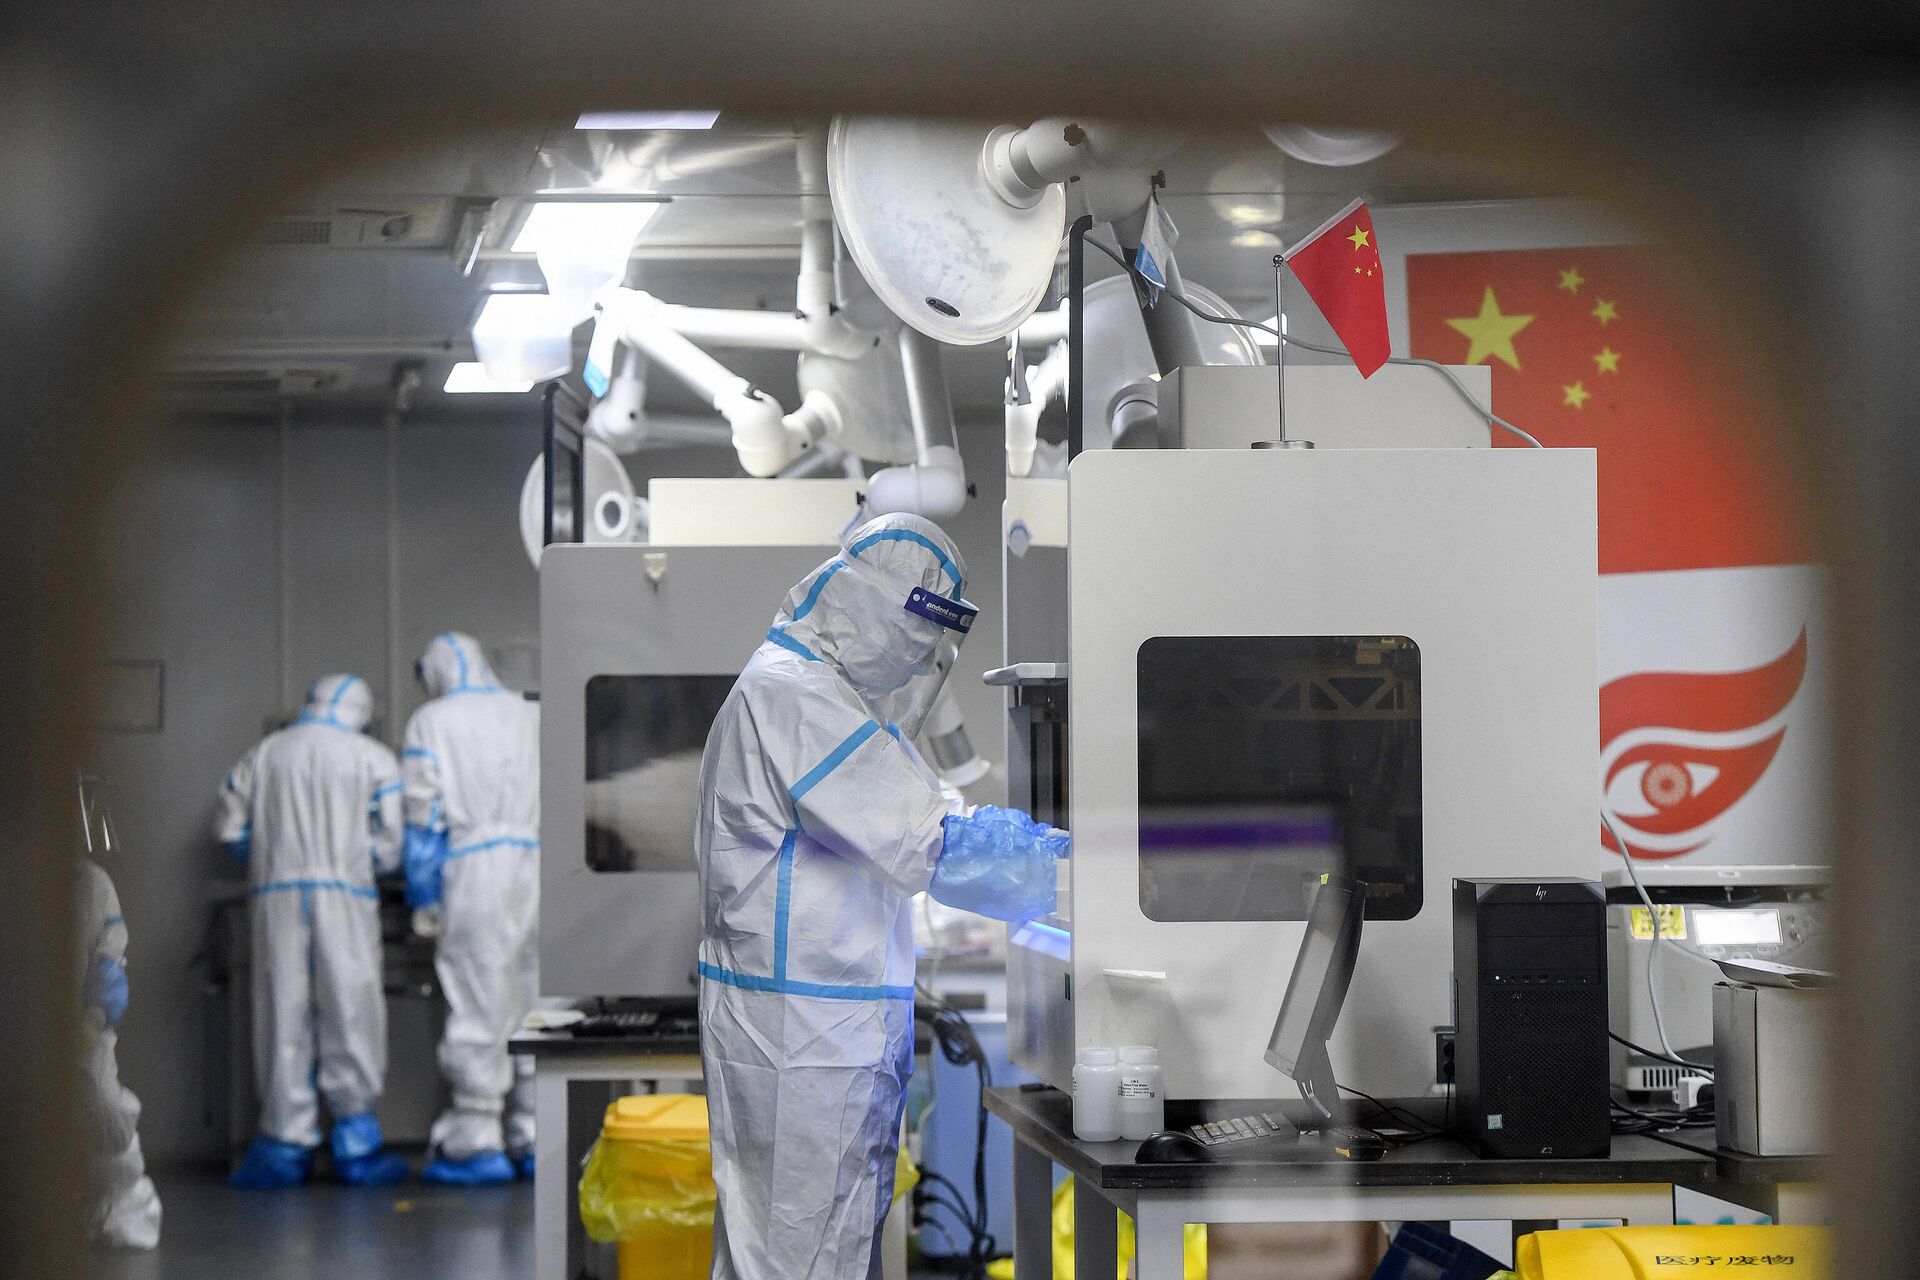 Laboratory technicians wearing personal protective equipment (PPE) work on samples to be tested for the Covid-19 coronavirus at the Fire Eye laboratory, a Covid-19 testing facility, in Wuhan in China's central Hubei province early on August 5, 2021 - Sputnik International, 1920, 19.09.2021